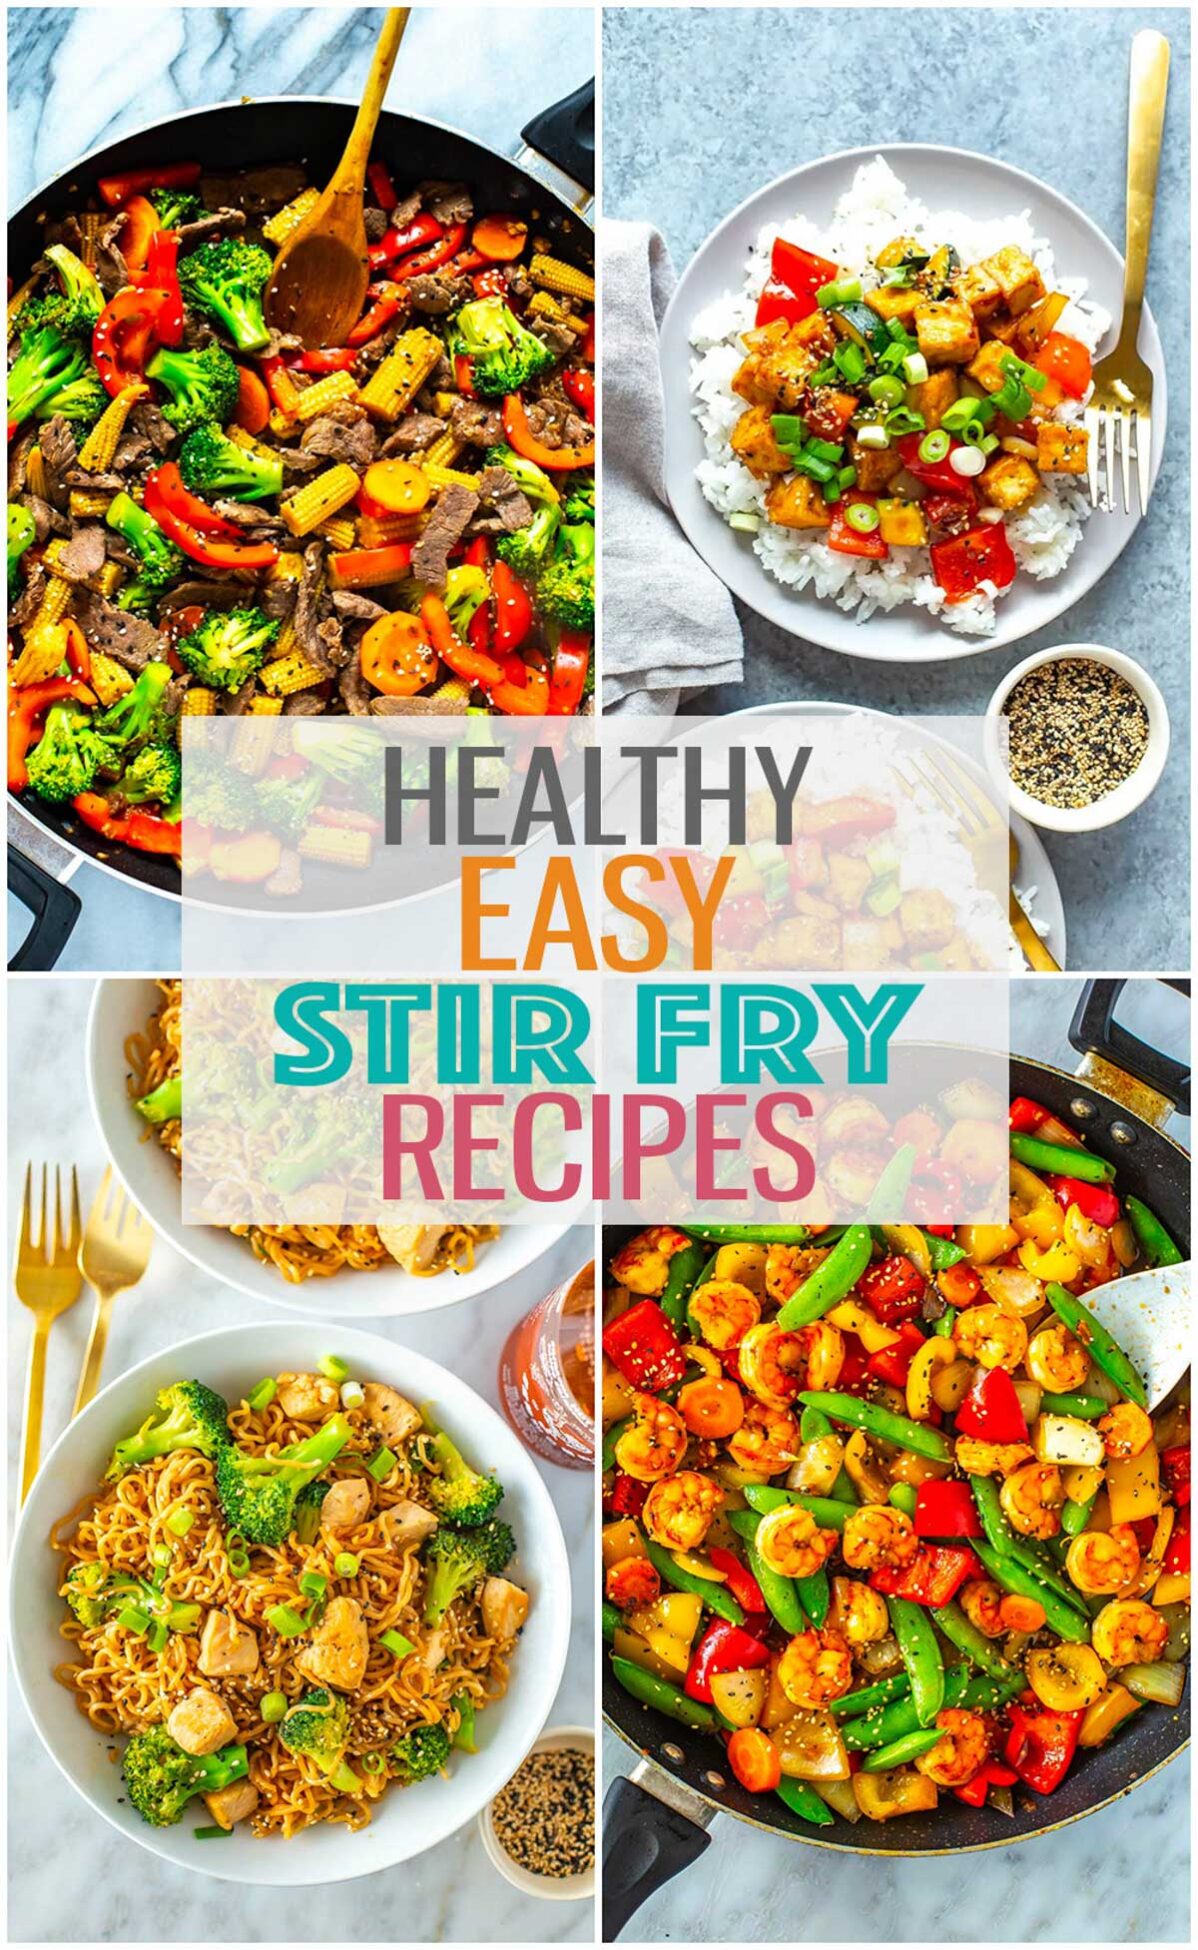 A collage of healthy stir fry recipes with the text "Healthy Easy Stir Fry Recipes" layered over top.